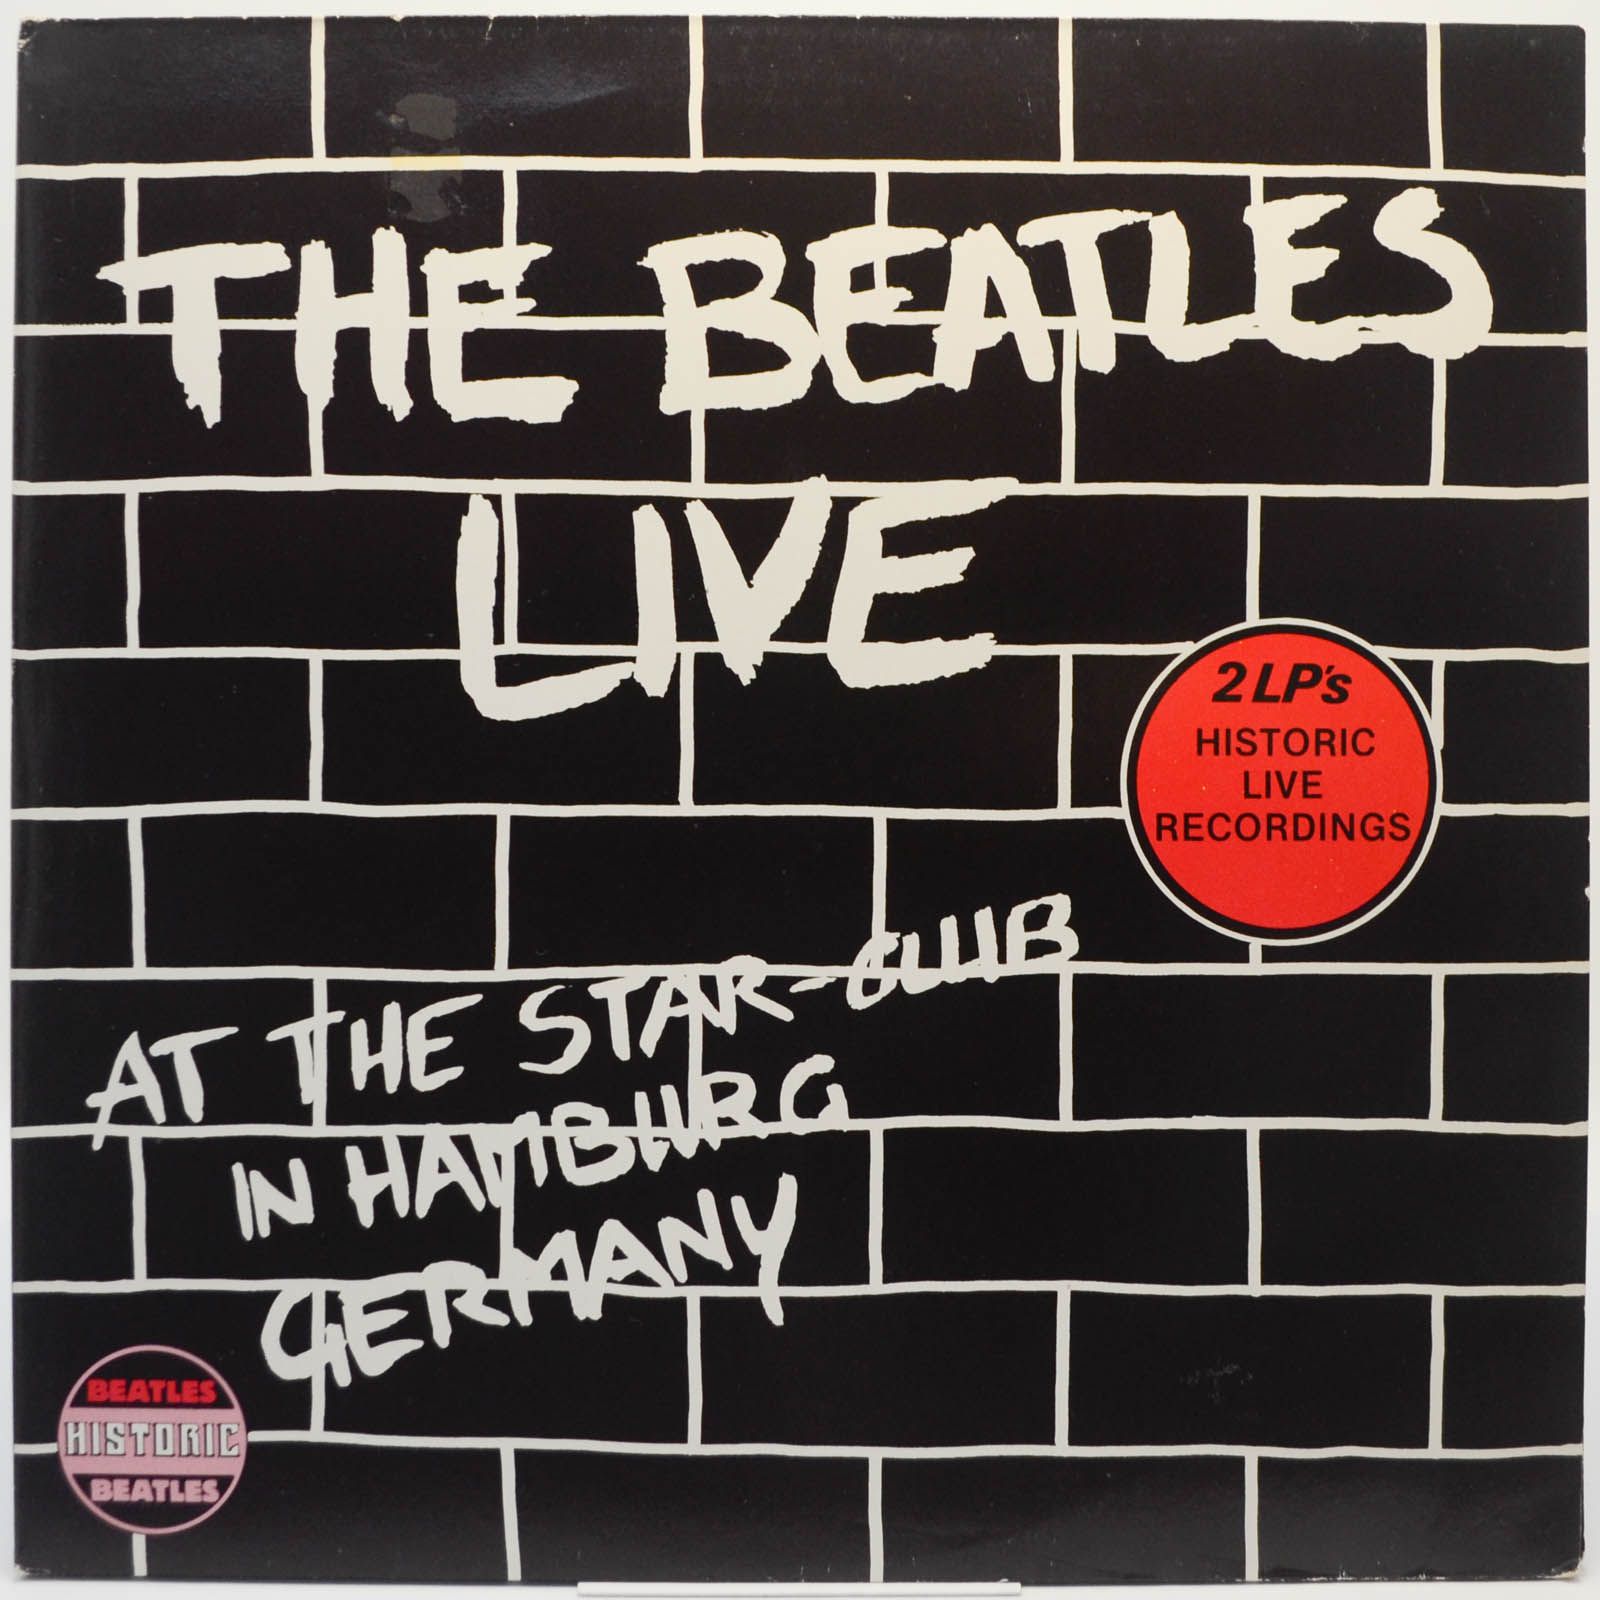 Beatles — Live At The Star-Club In Hamburg Germany (2LP), 1982